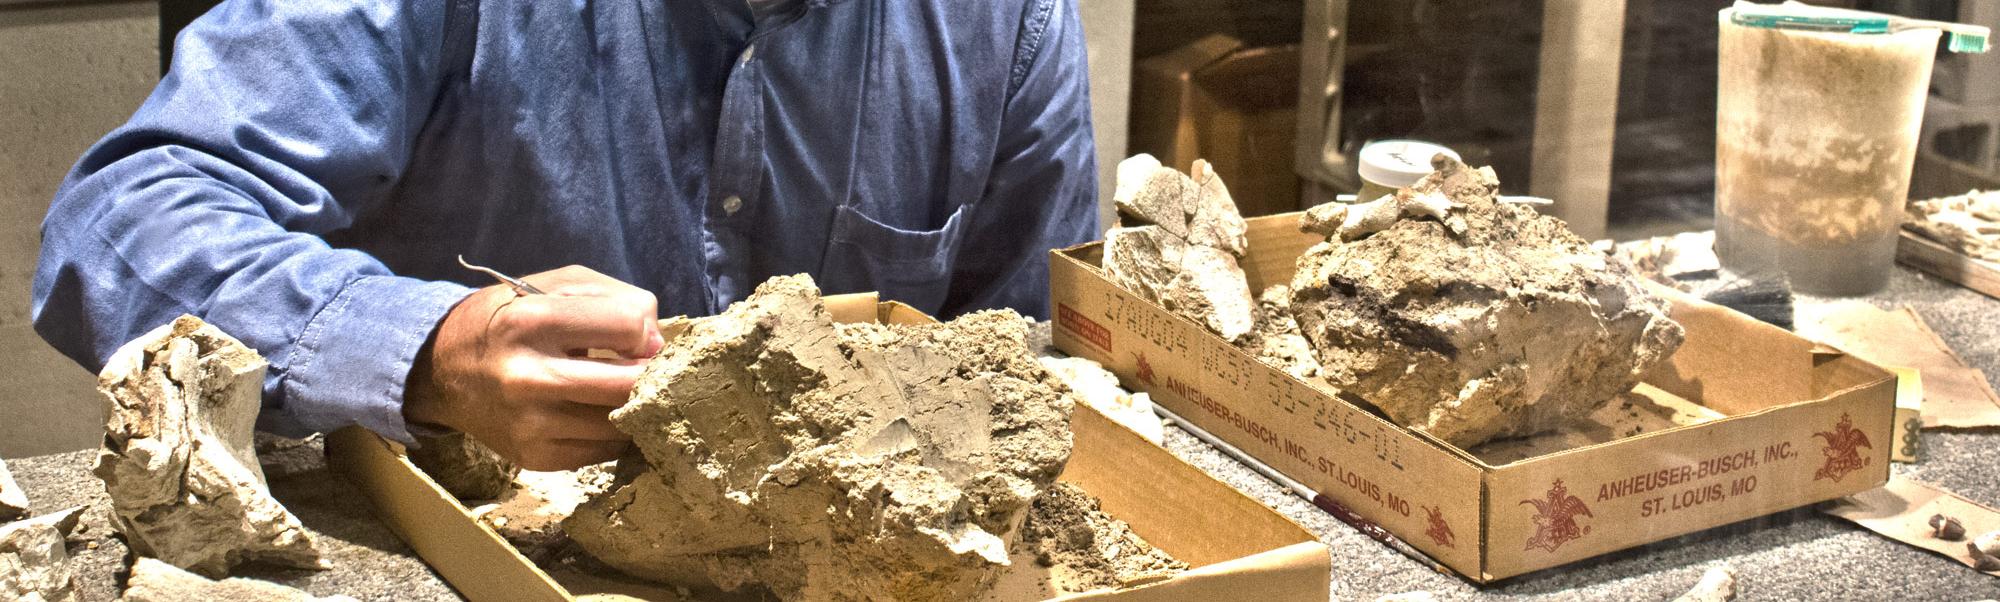 Bearded man in blue shirt hold small scraping instrument up against a rock containing a fossil specimen.